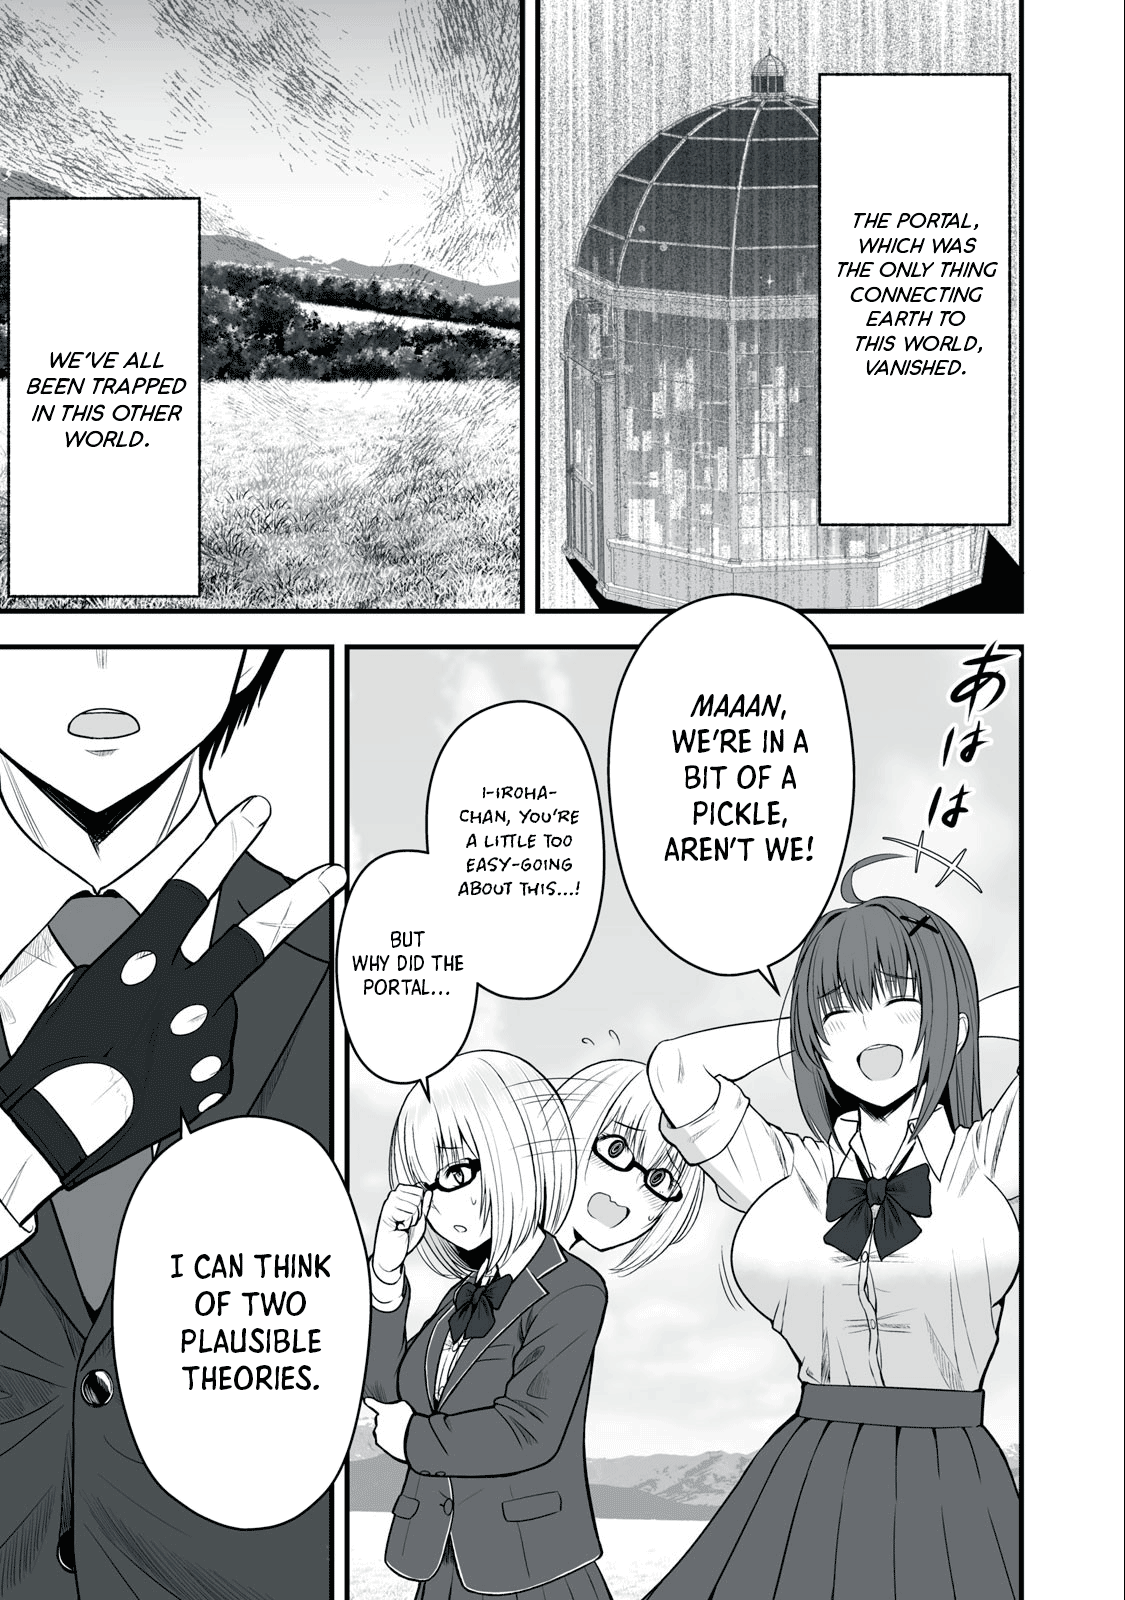 Easy Survival In Another World - Page 1